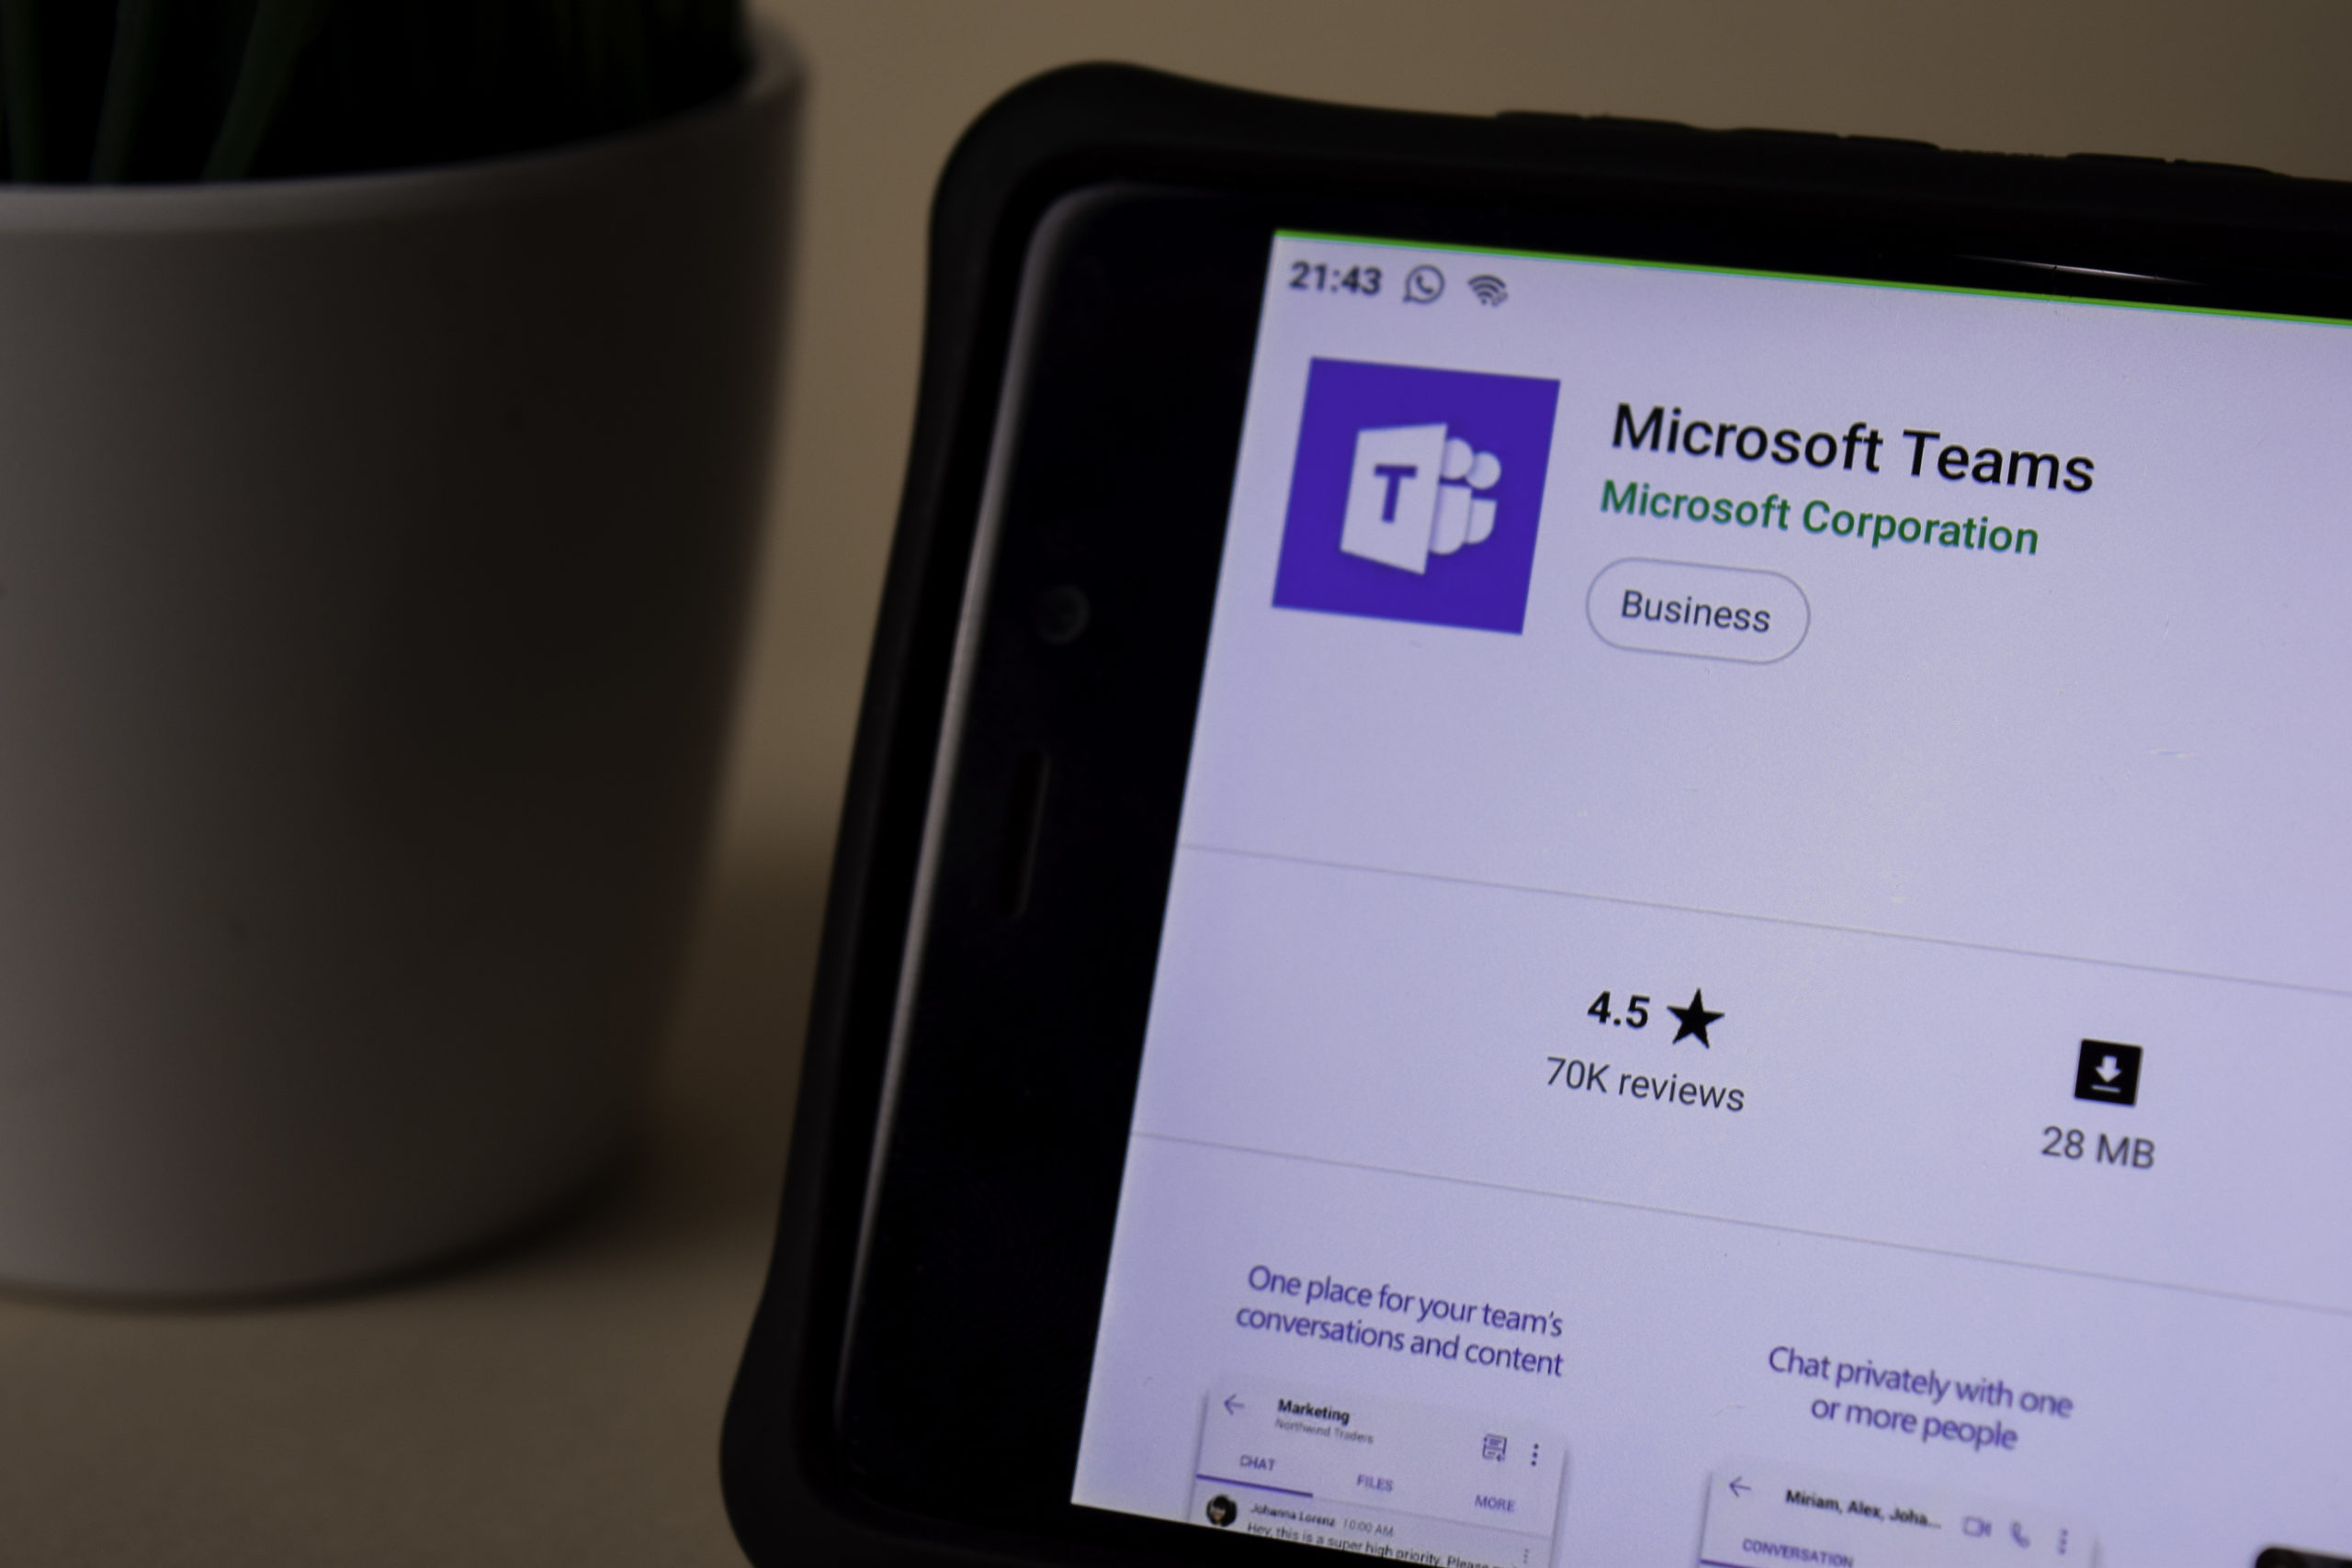 Smart Ways You Can Use Microsoft Teams During Covid-19 (and Beyond)